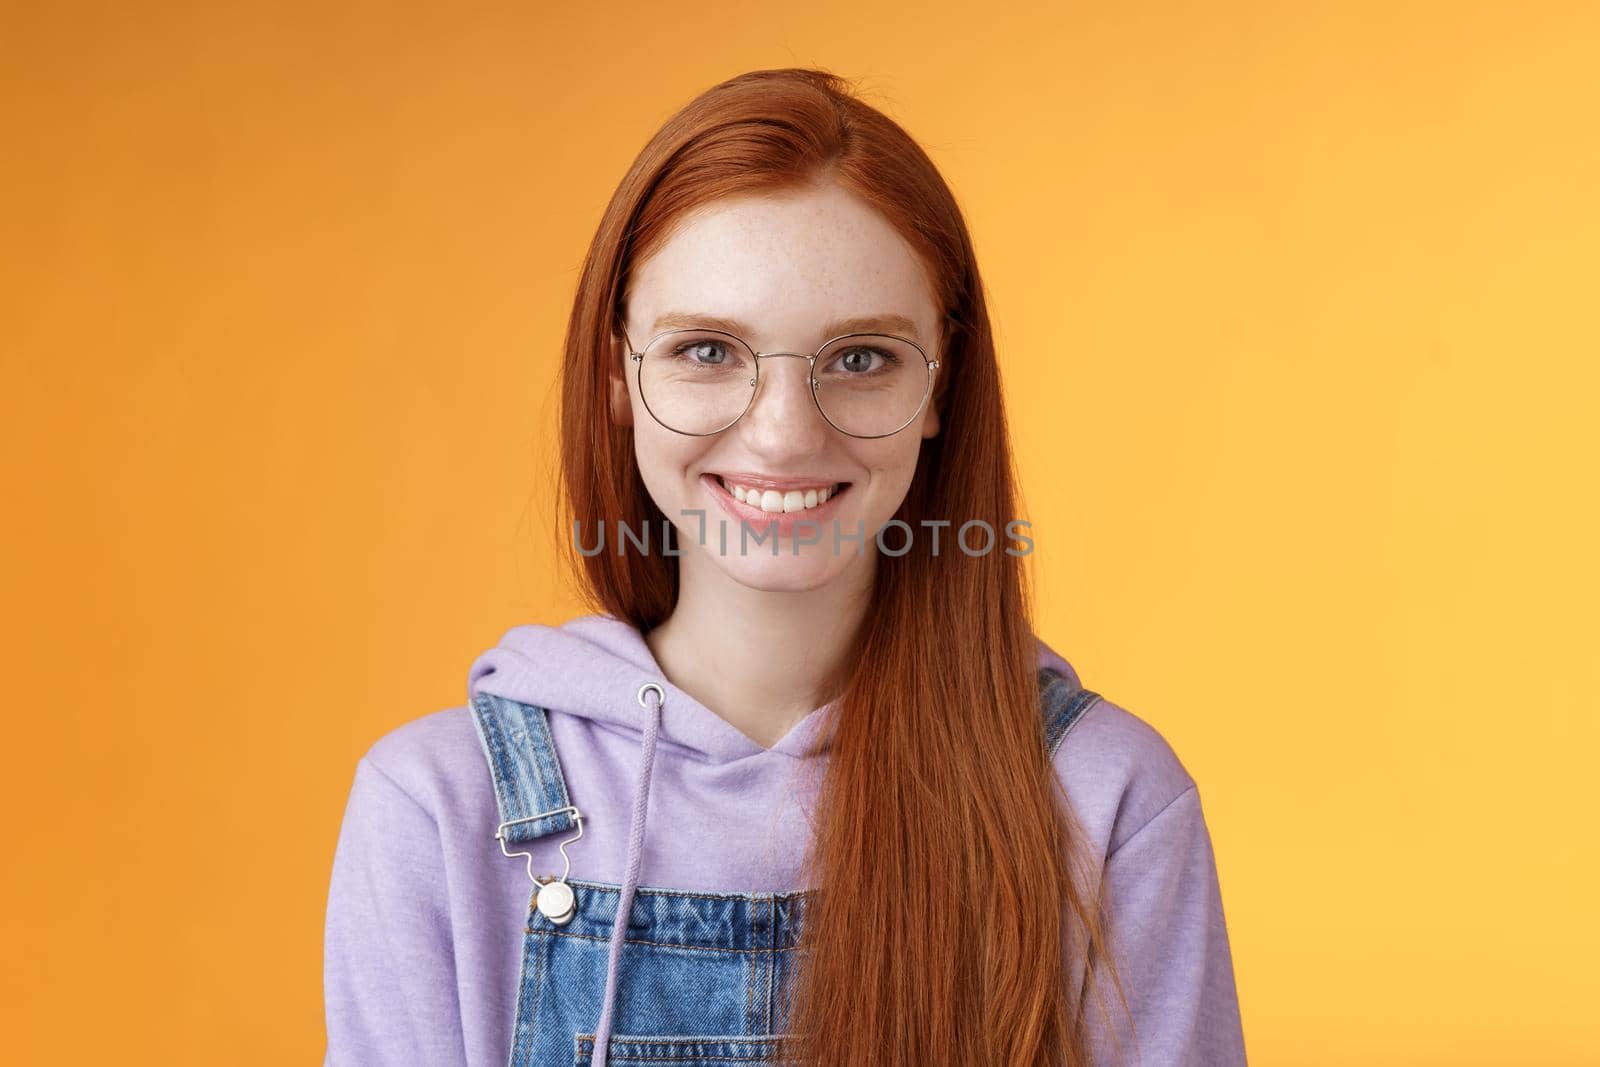 Good-looking redhead female programmer glasses hoodie smiling satisfied look professional aim success standing confident grinning delighted camera talking casually orange background.